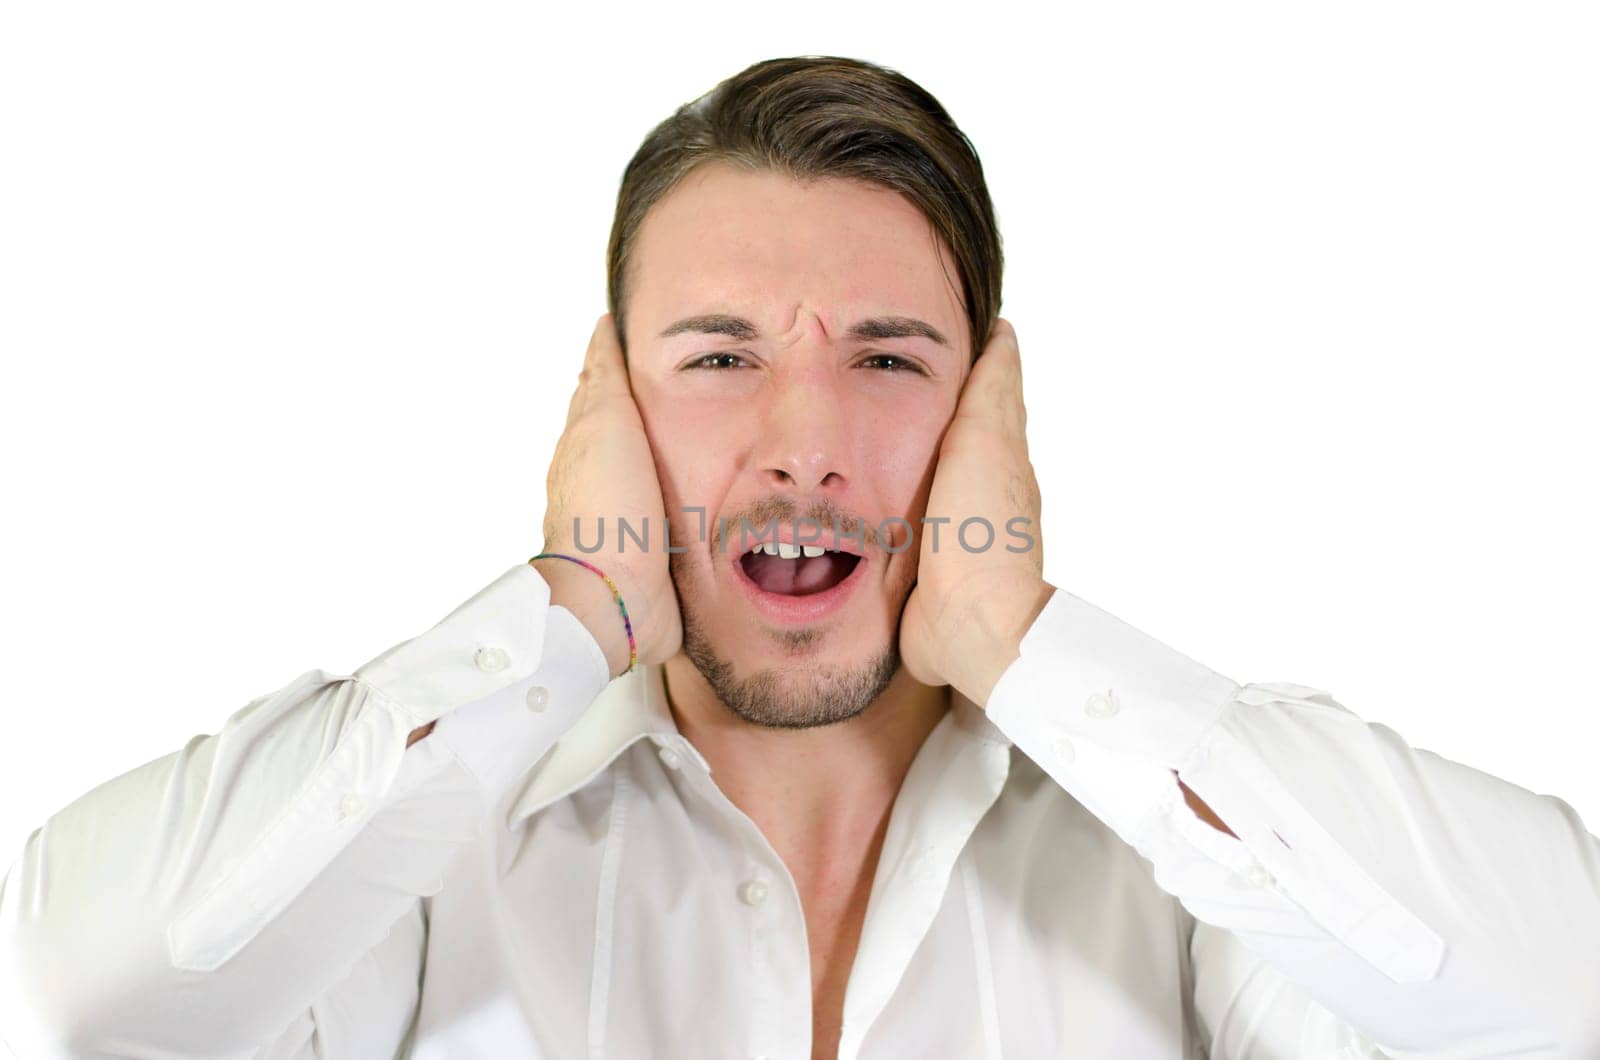 Too much noise, attractive young man covering his ears, isolated on white